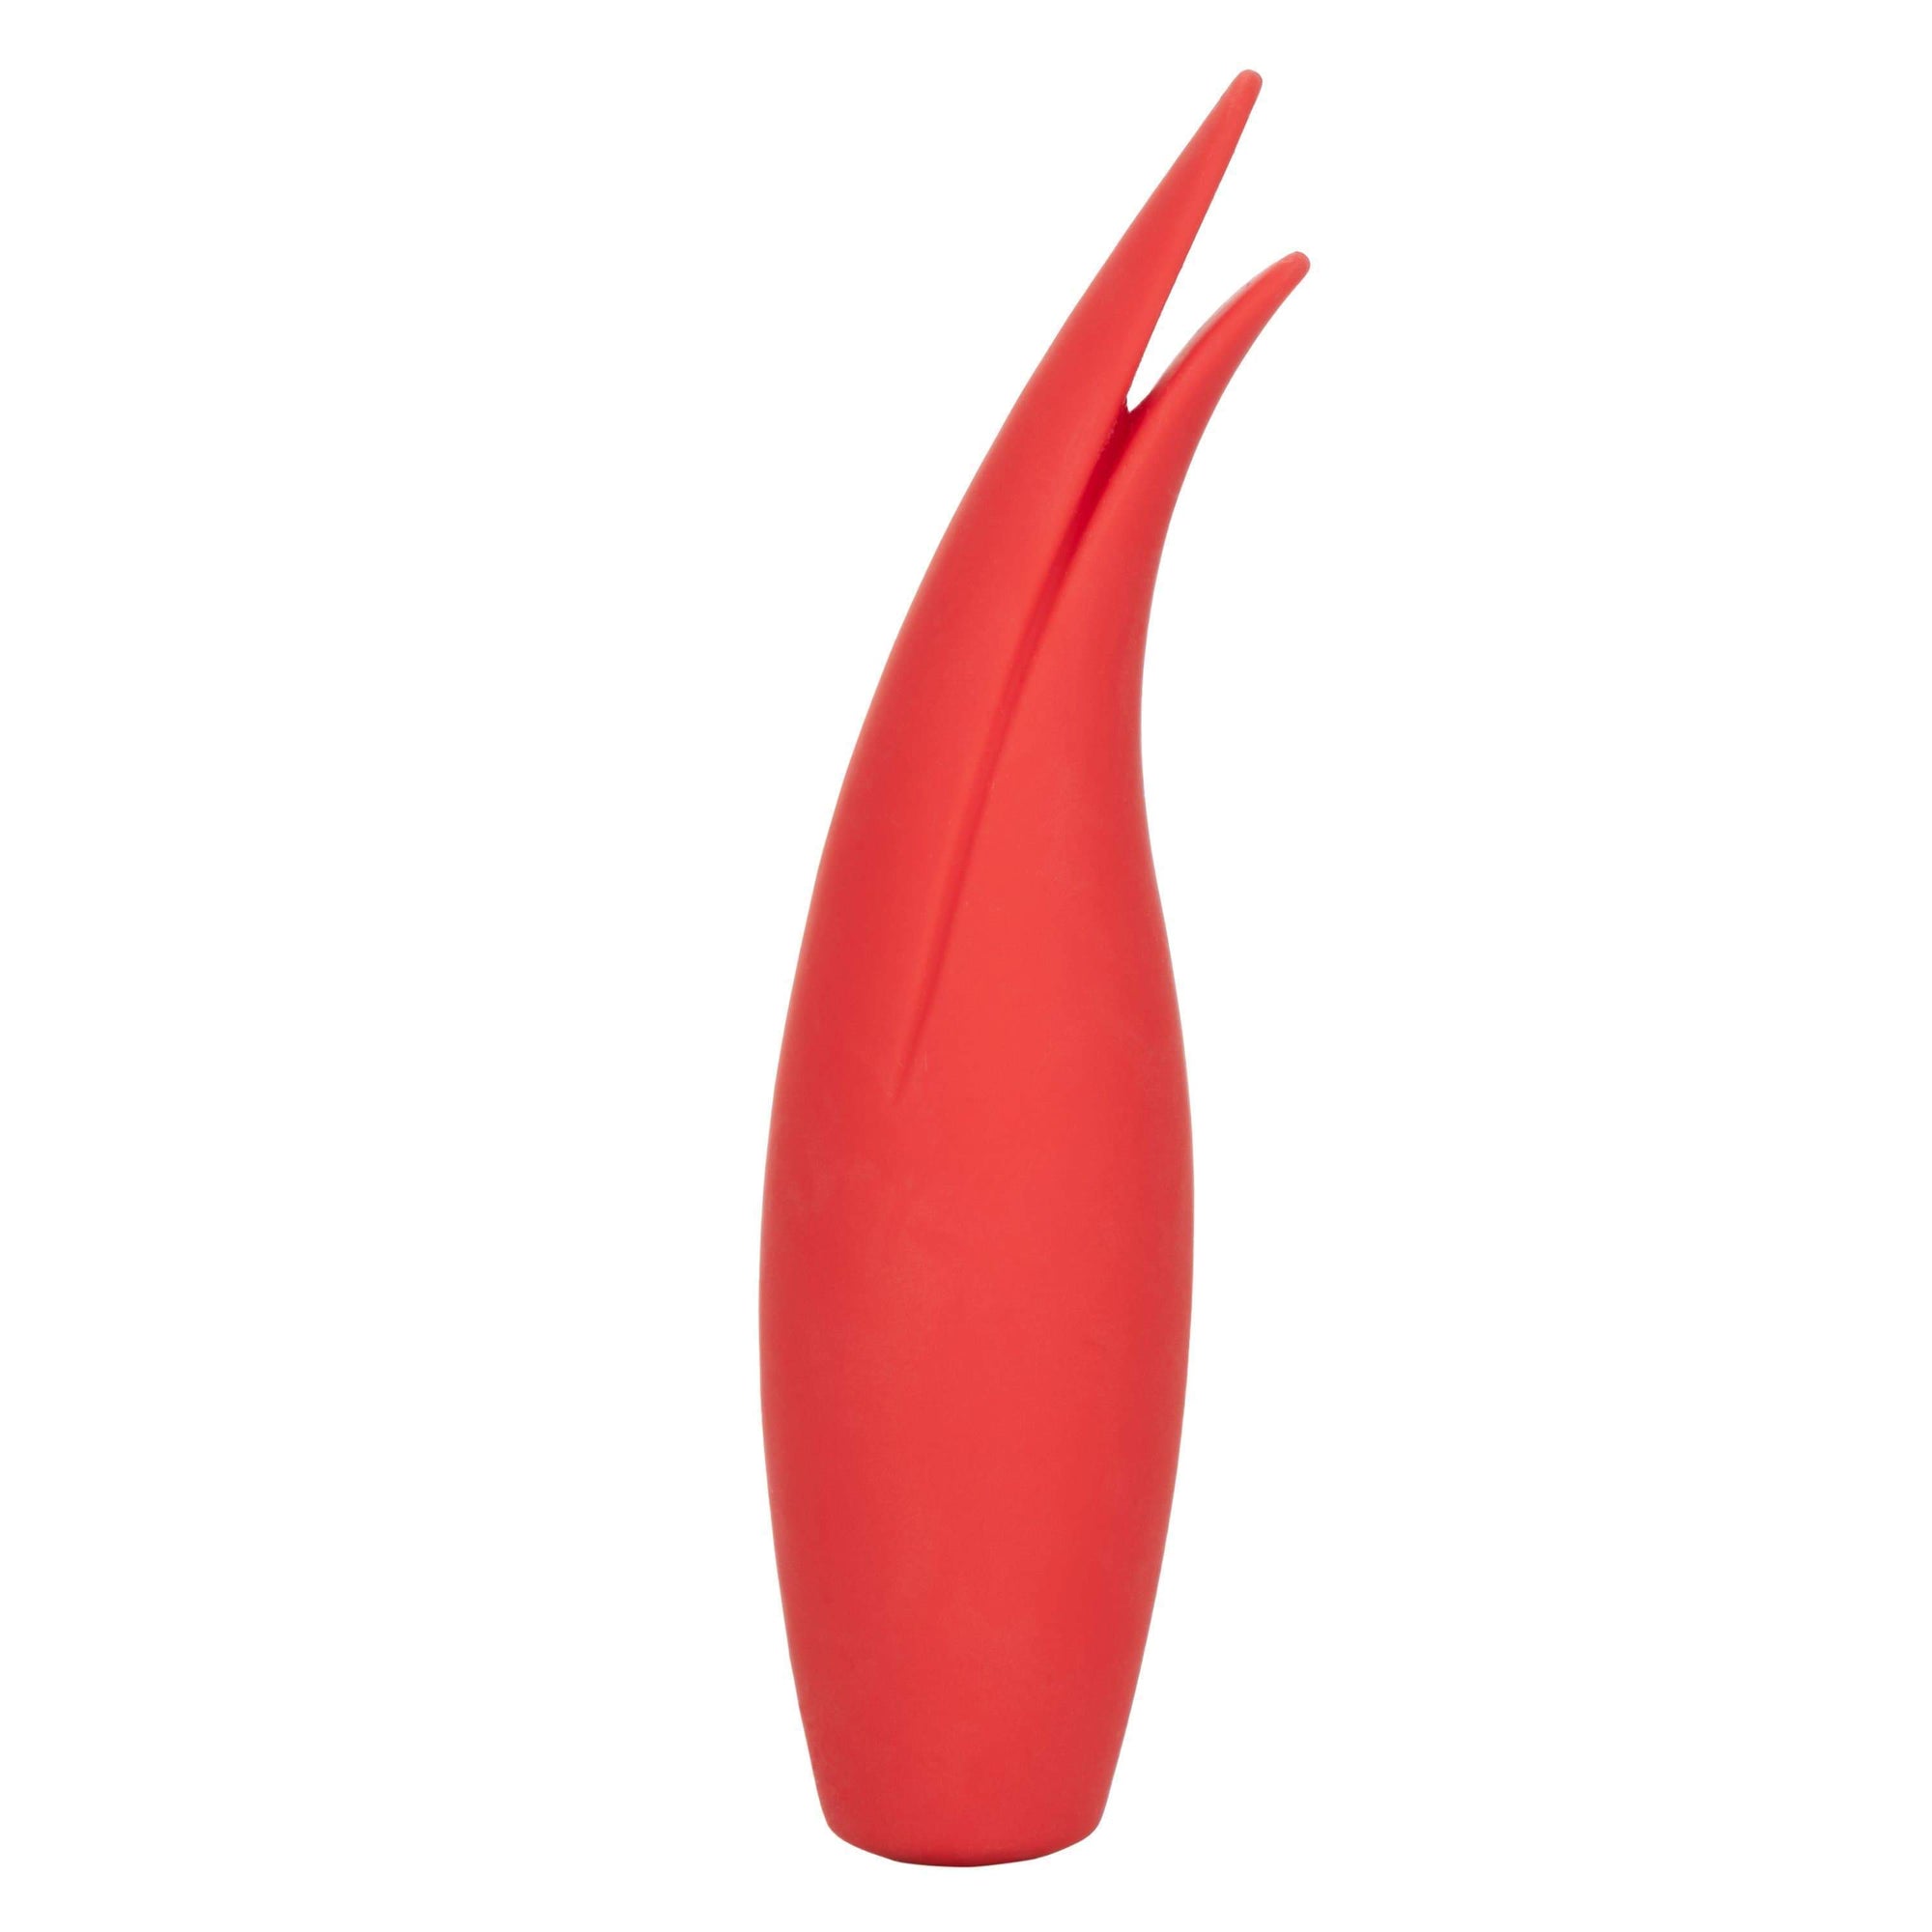 California Exotics - Red Hot Sizzle Clit Massager (Red) Clit Massager (Vibration) Rechargeable